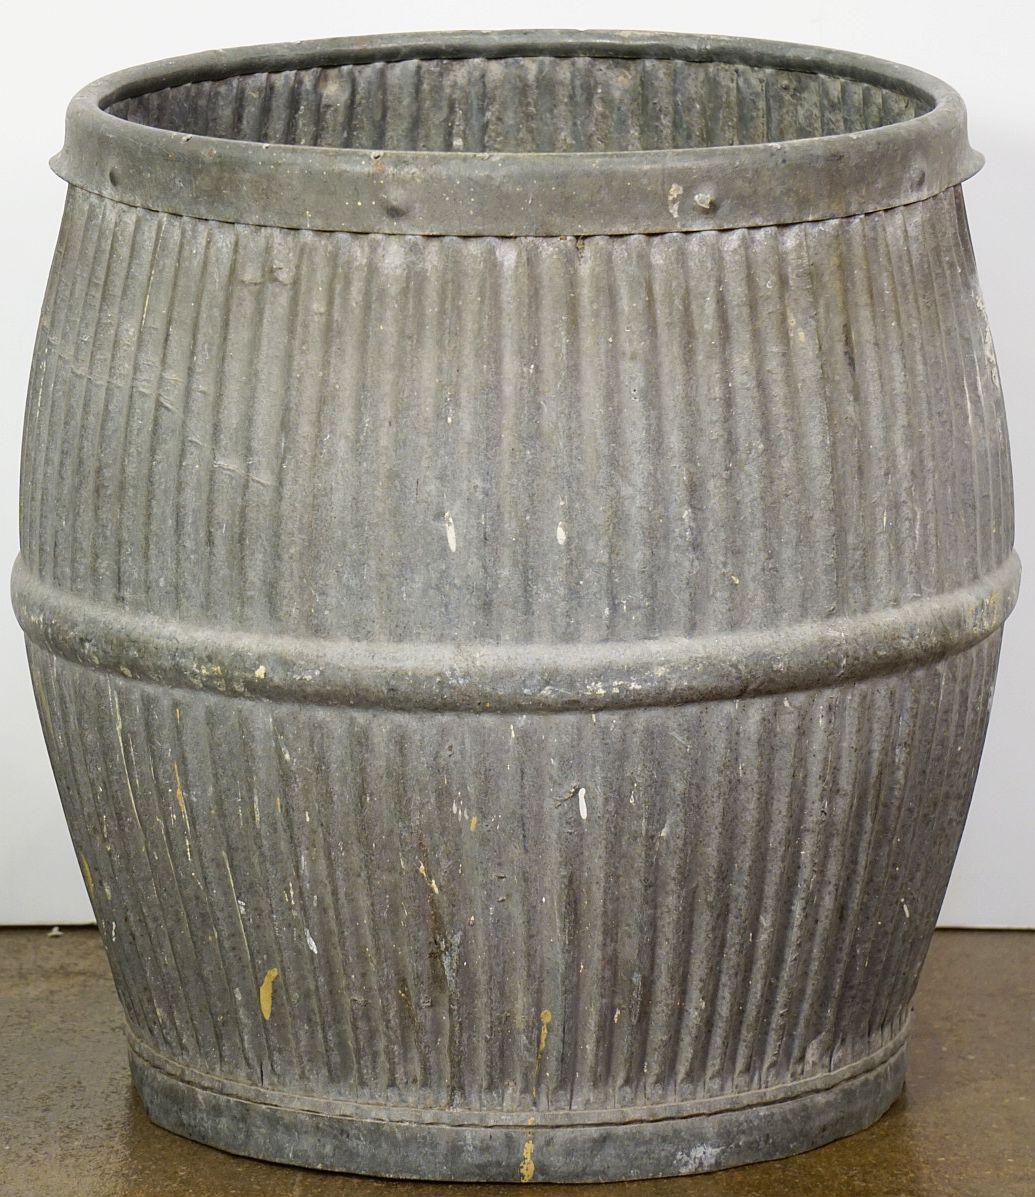 English Garden Pot or Dolly Tub Planter of Zinc For Sale 13